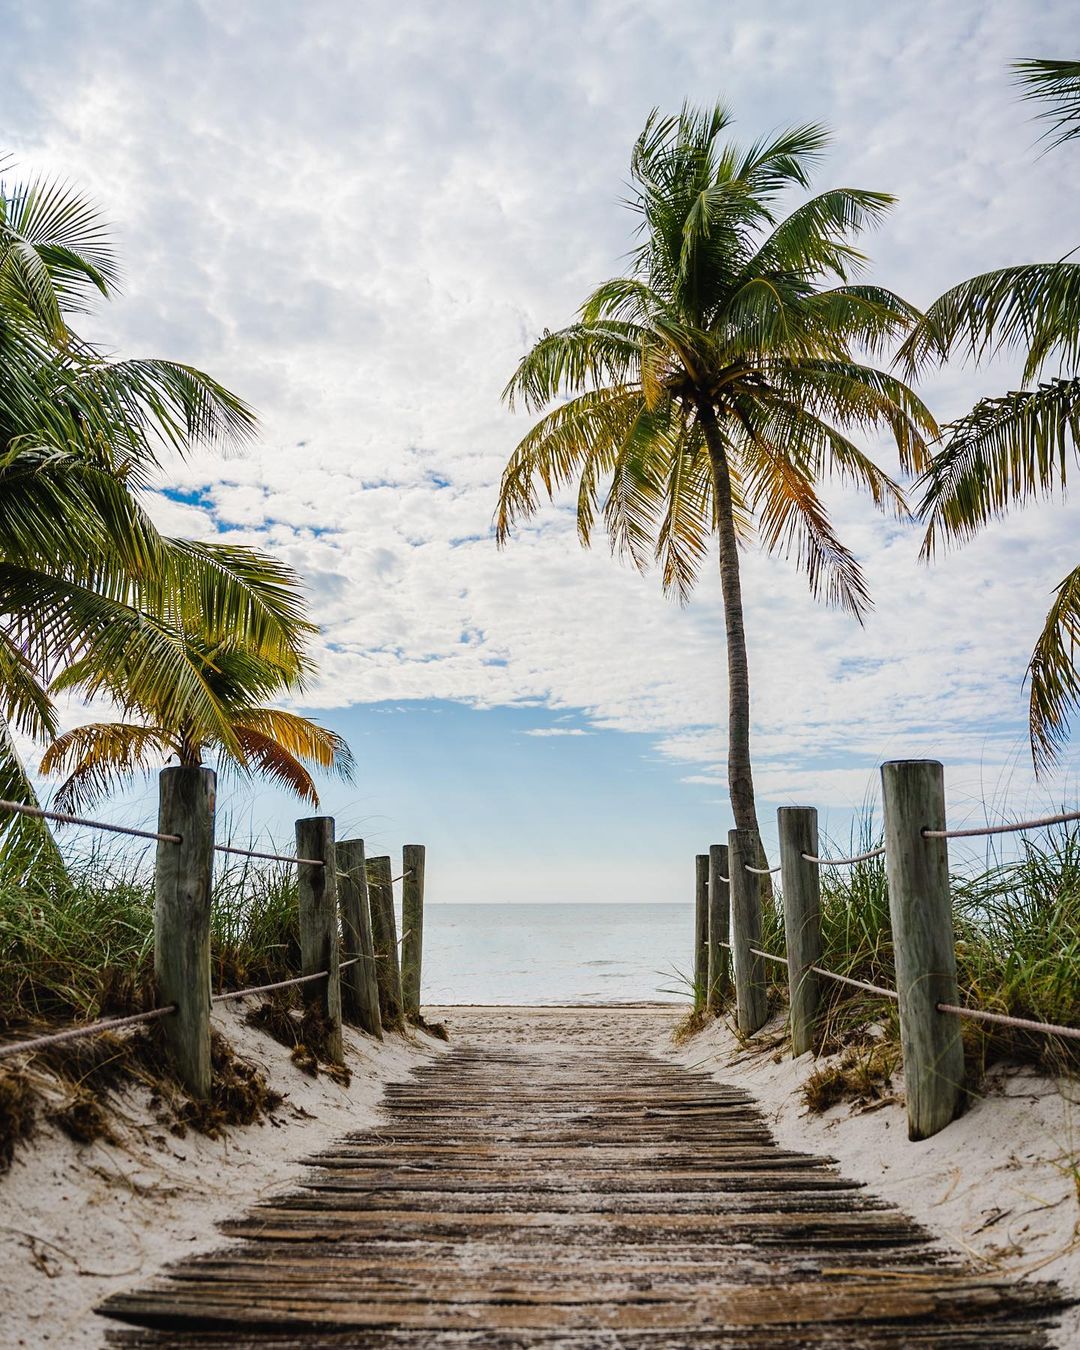 Palm trees line the path to a Key West beach. Photo by Instagram user @kris.feavel.